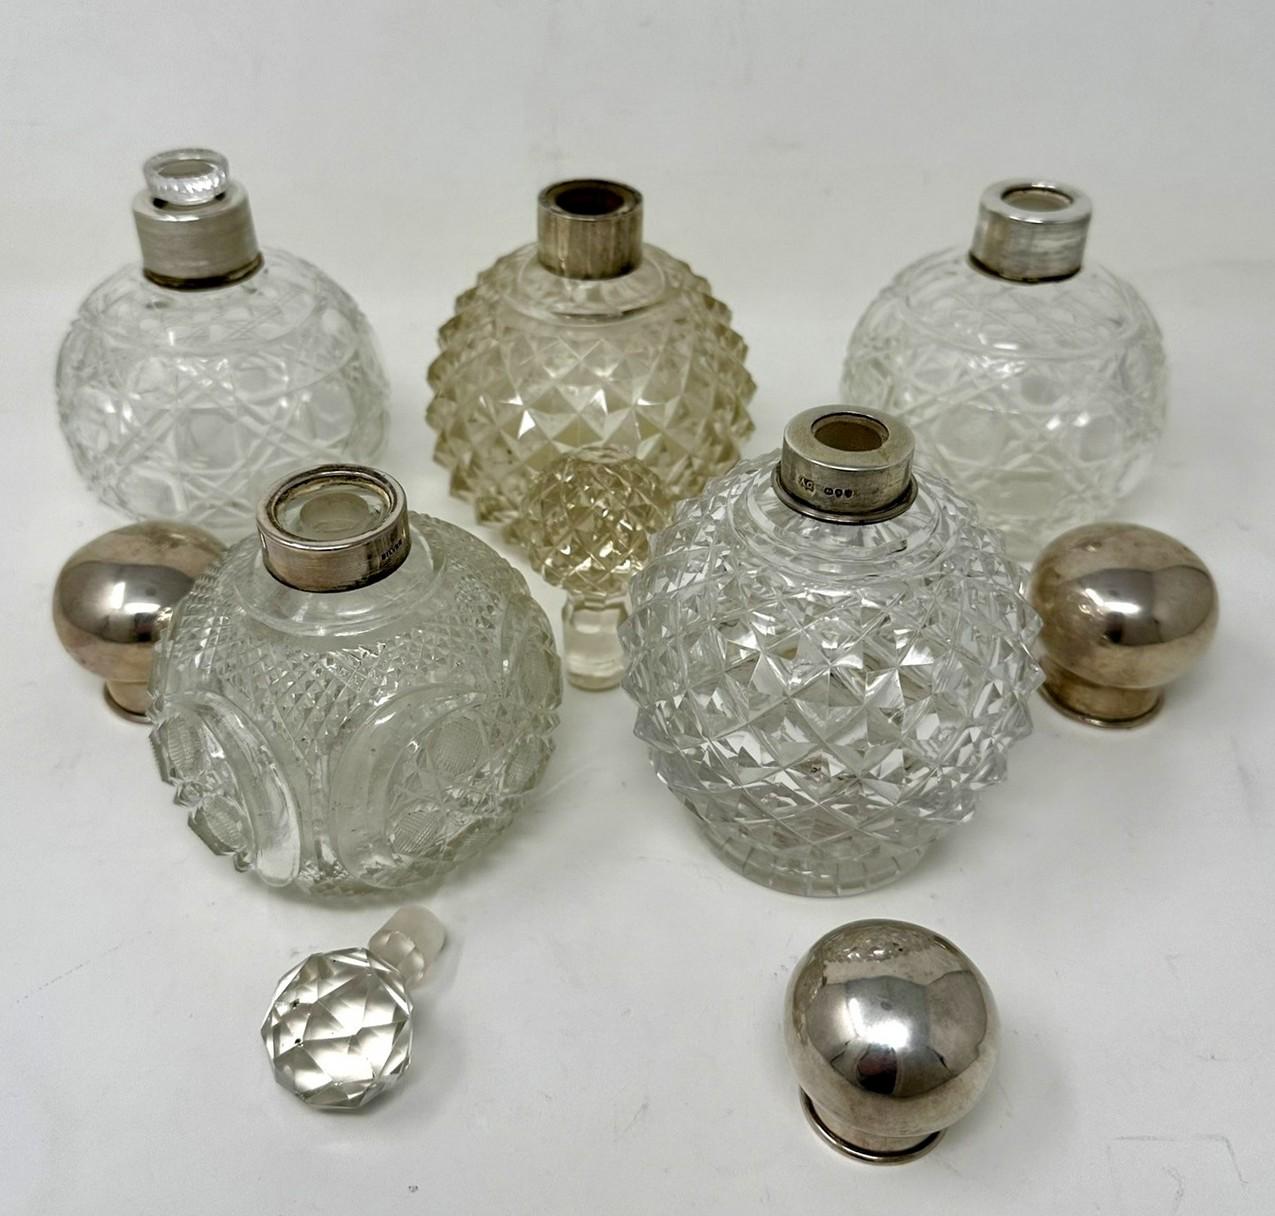 Set Antique English Crystal Sterling Victorian Silver Scent Perfume Bottles 1891 1